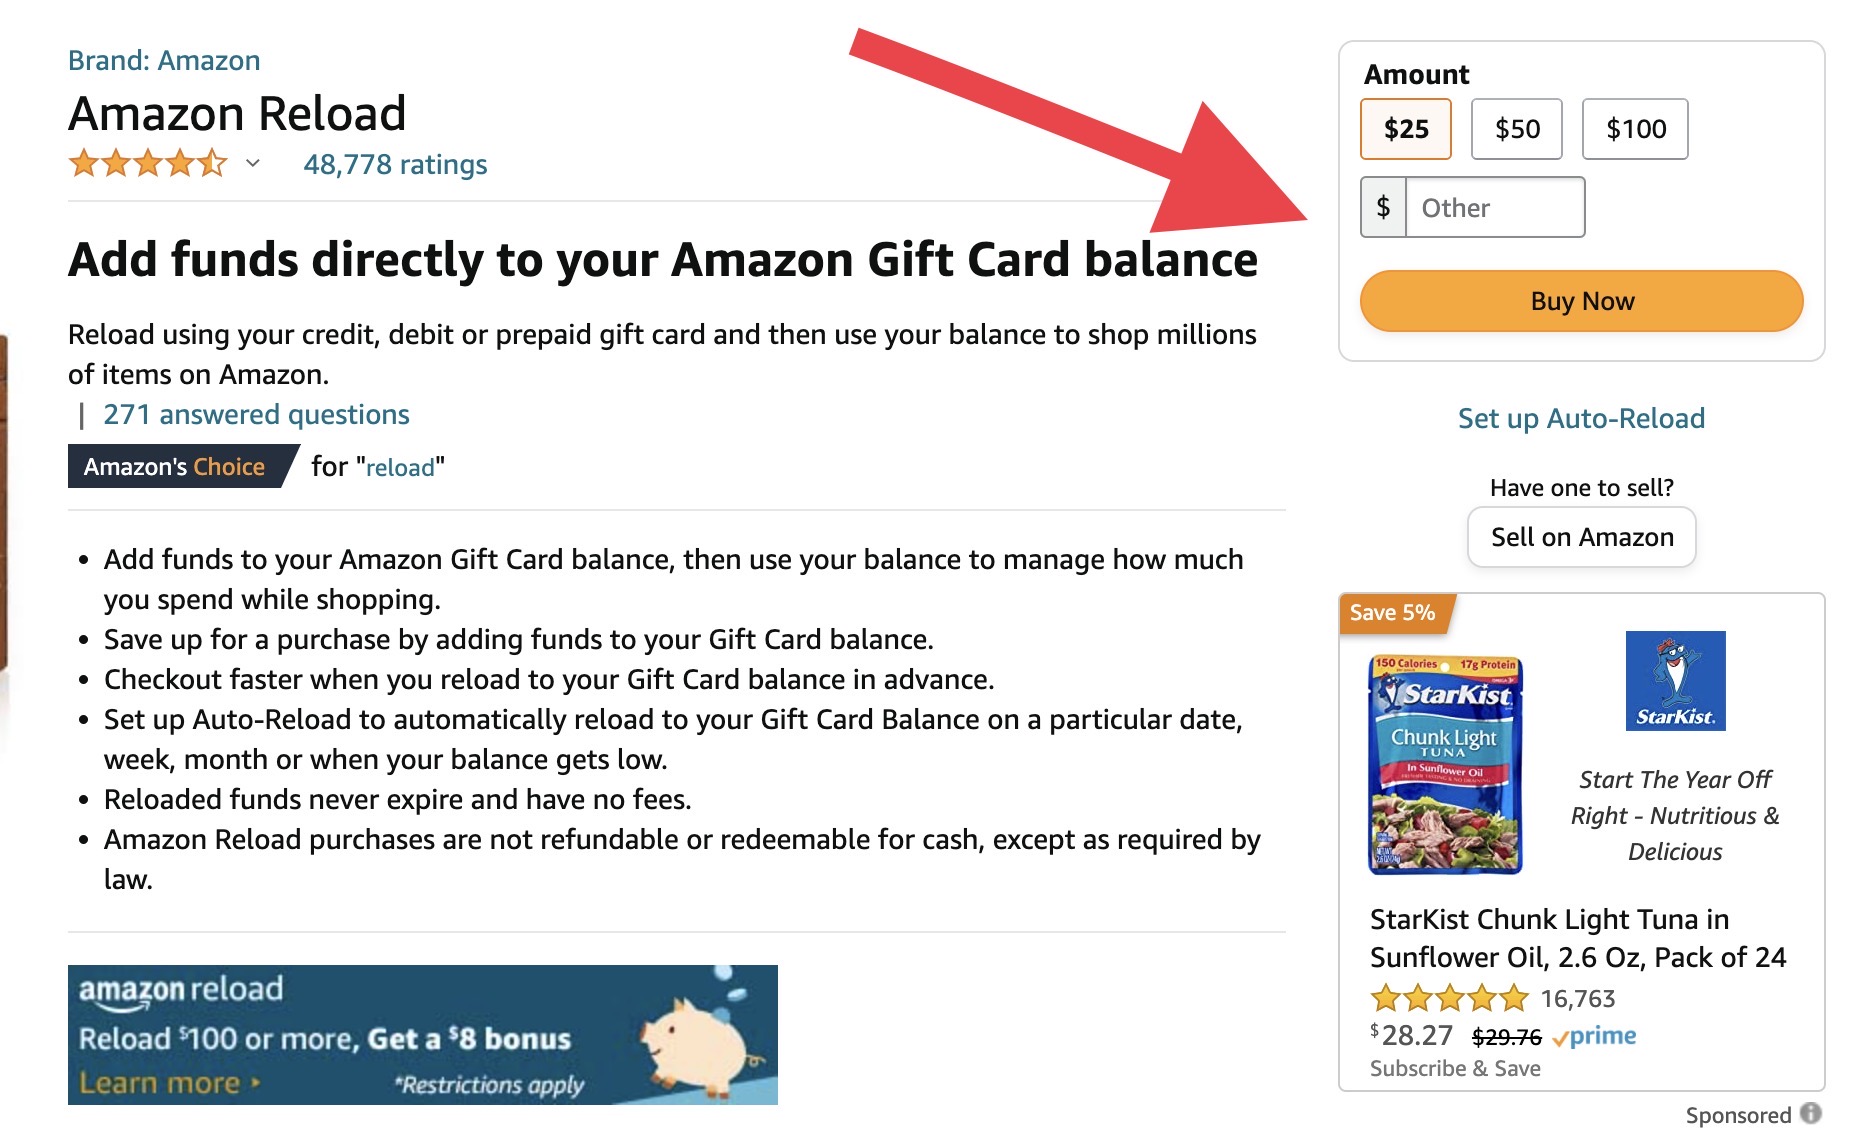 Are Amazon Visa Gift Cards Safe?